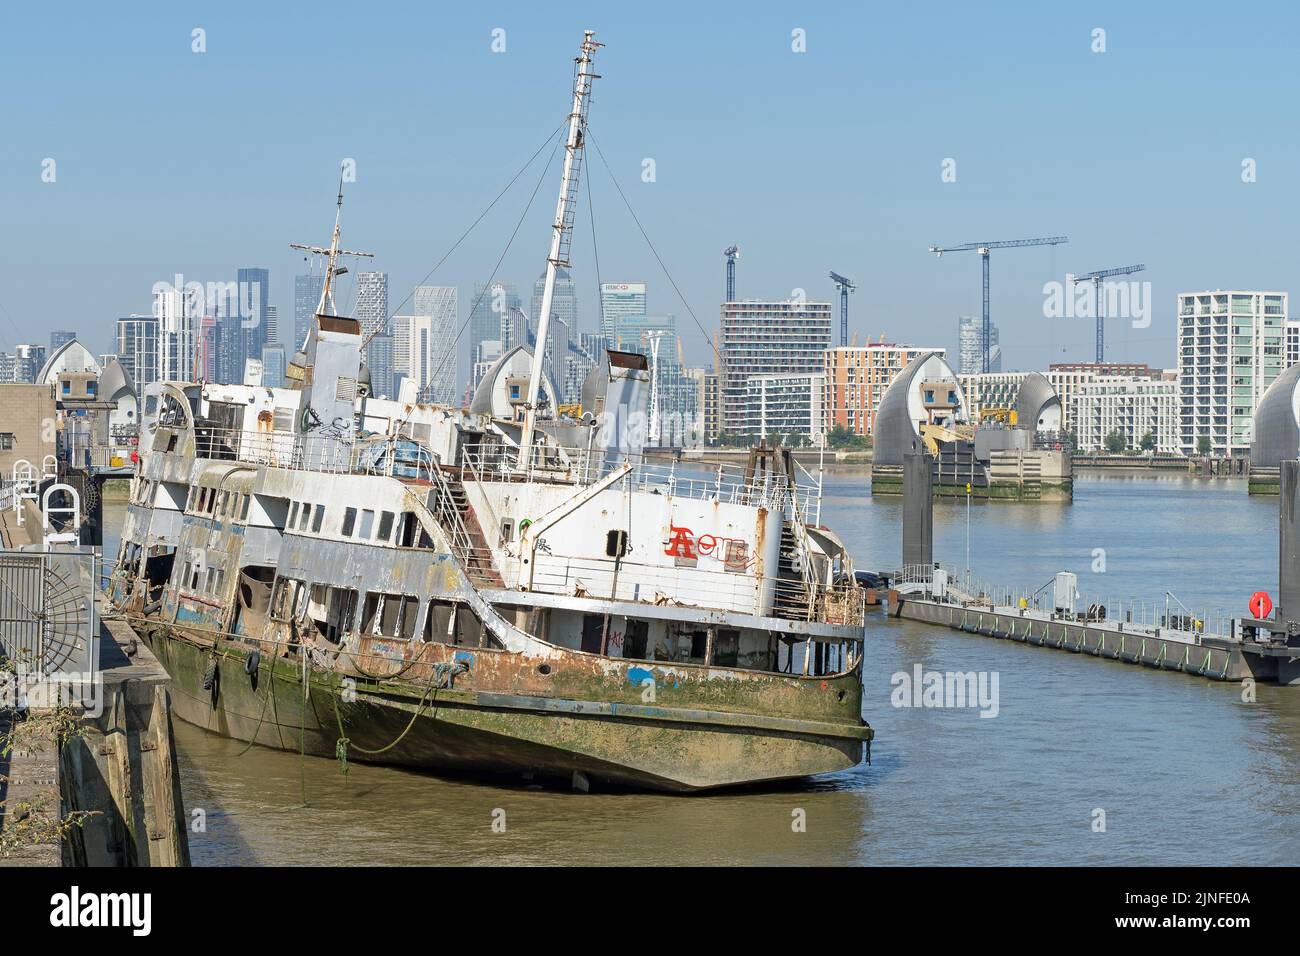 Old abandoned rusting ship on the bank of the River Thames. London Stock Photo